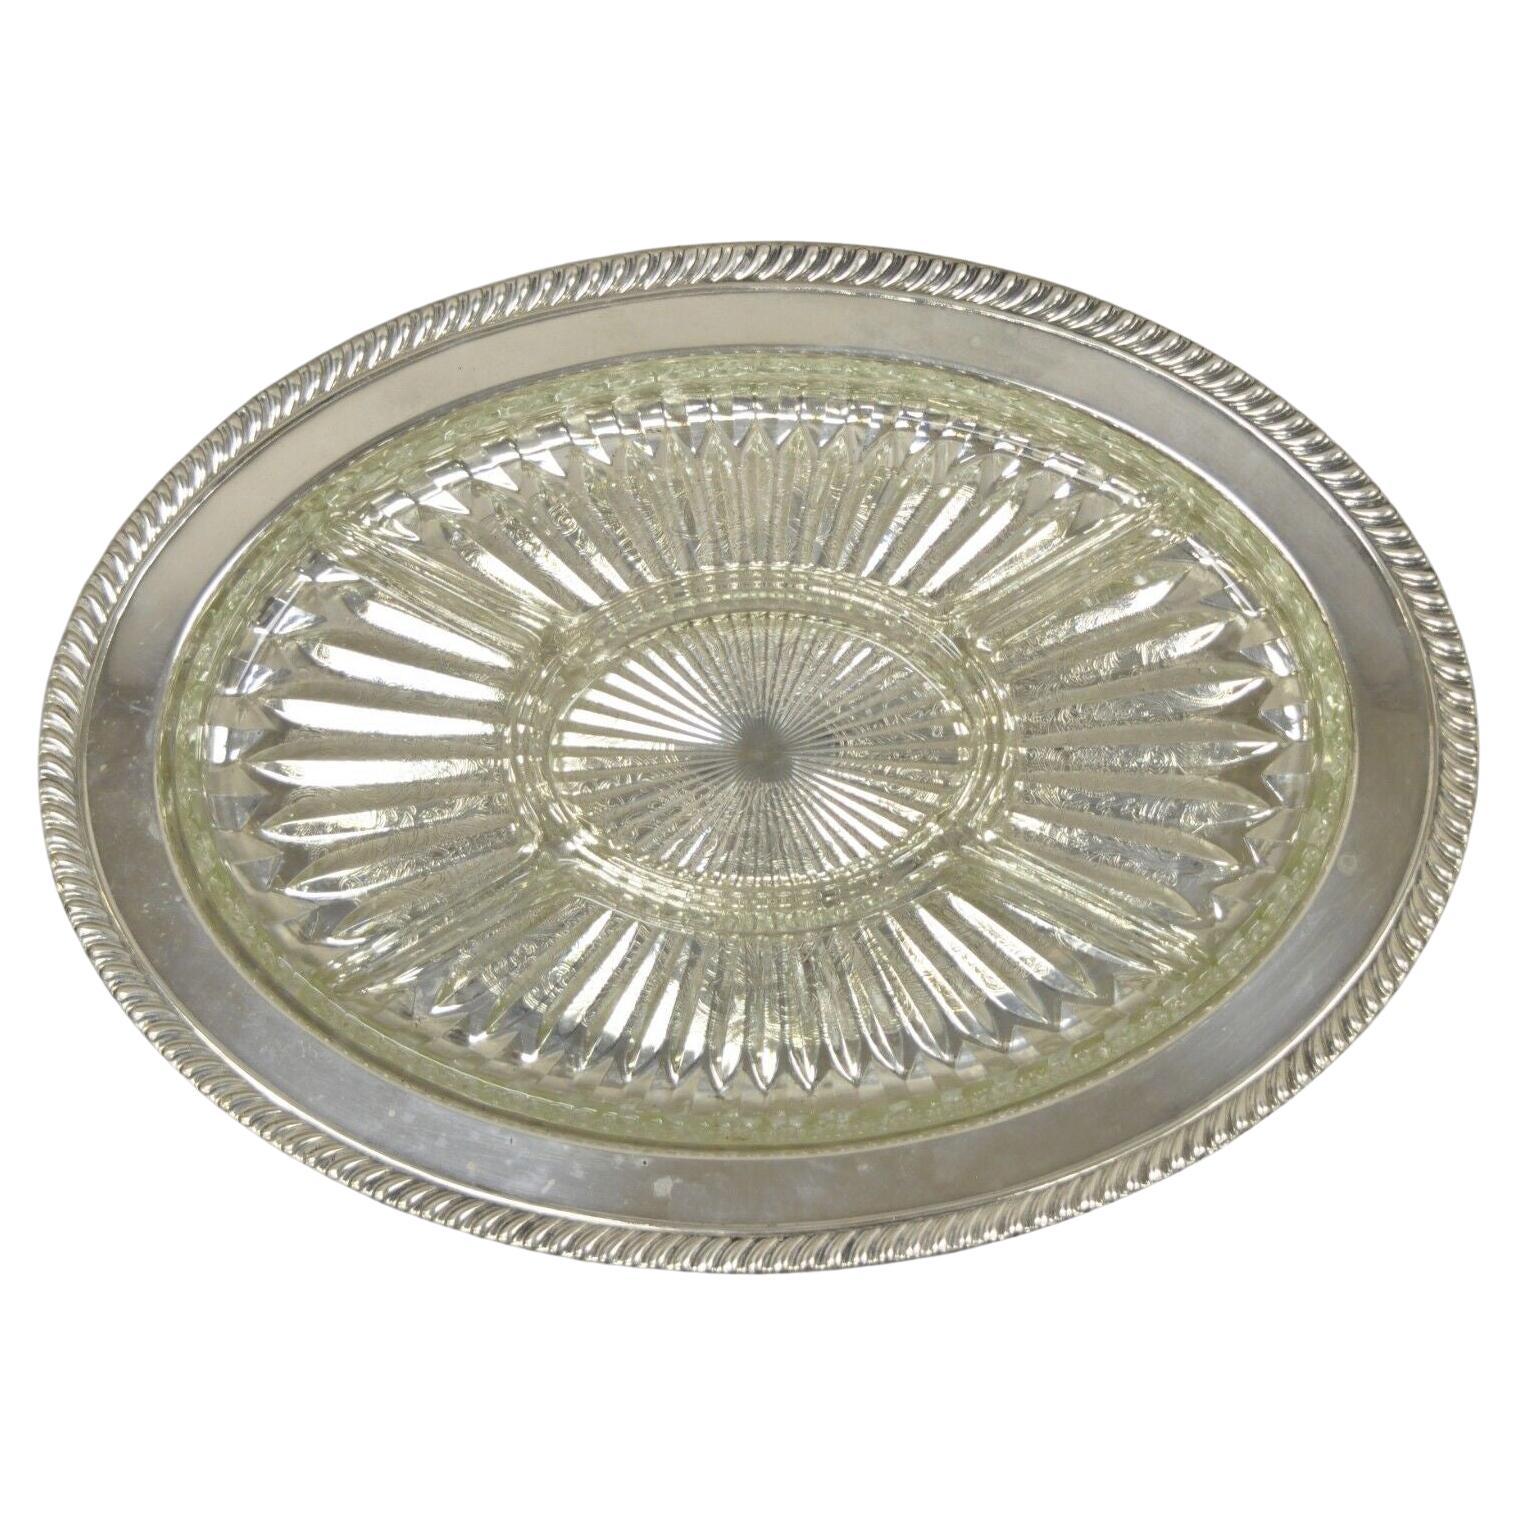 Vintage English Regency Style Silver Plated Oval Serving Dish Platter For Sale